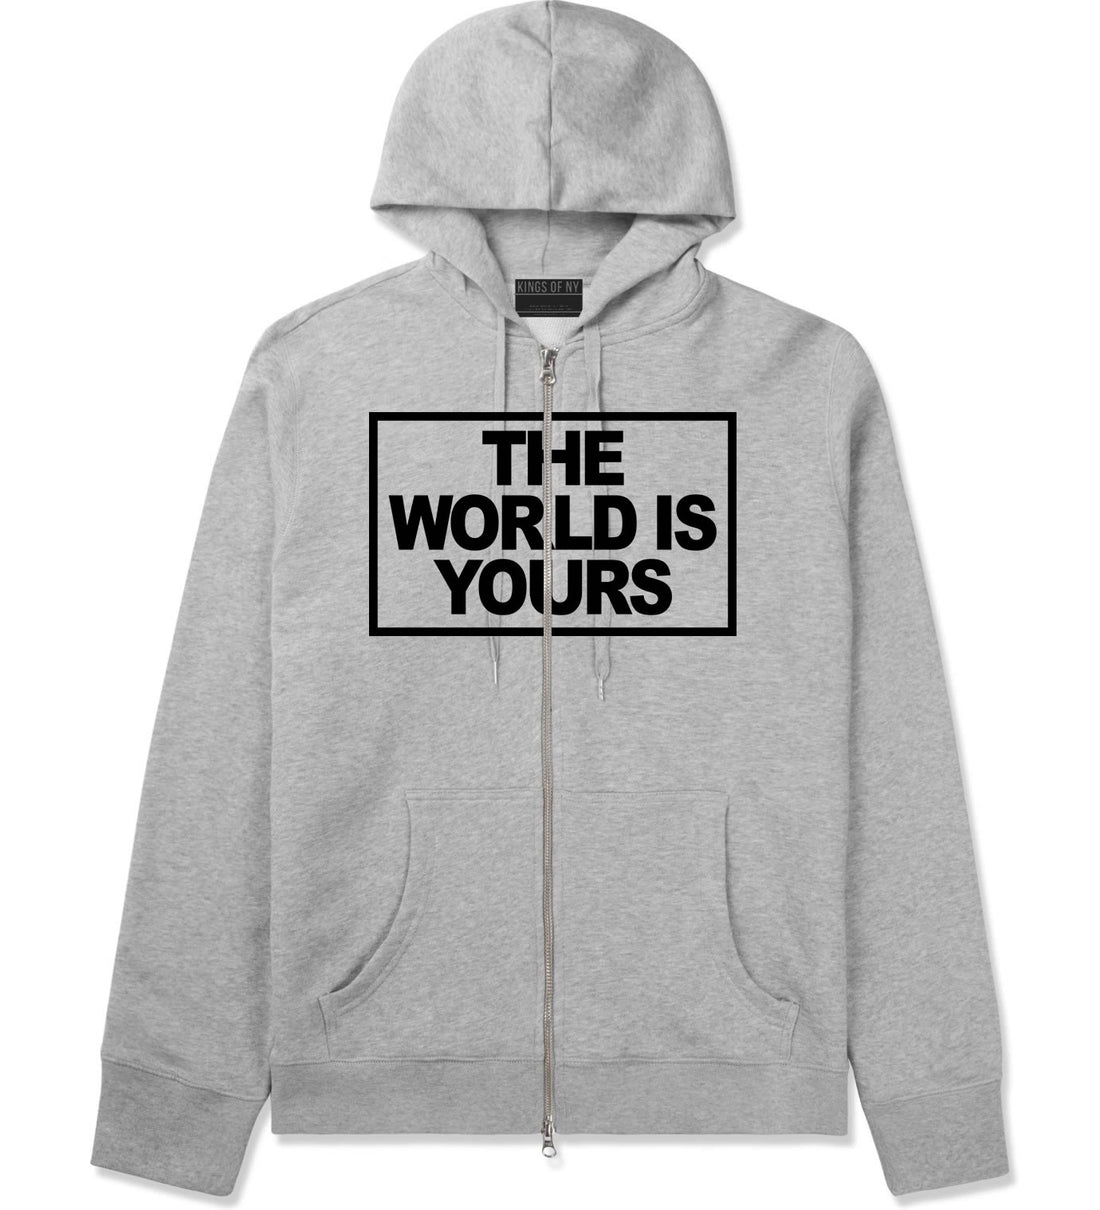 The World Is Yours Zip Up Hoodie in Grey By Kings Of NY